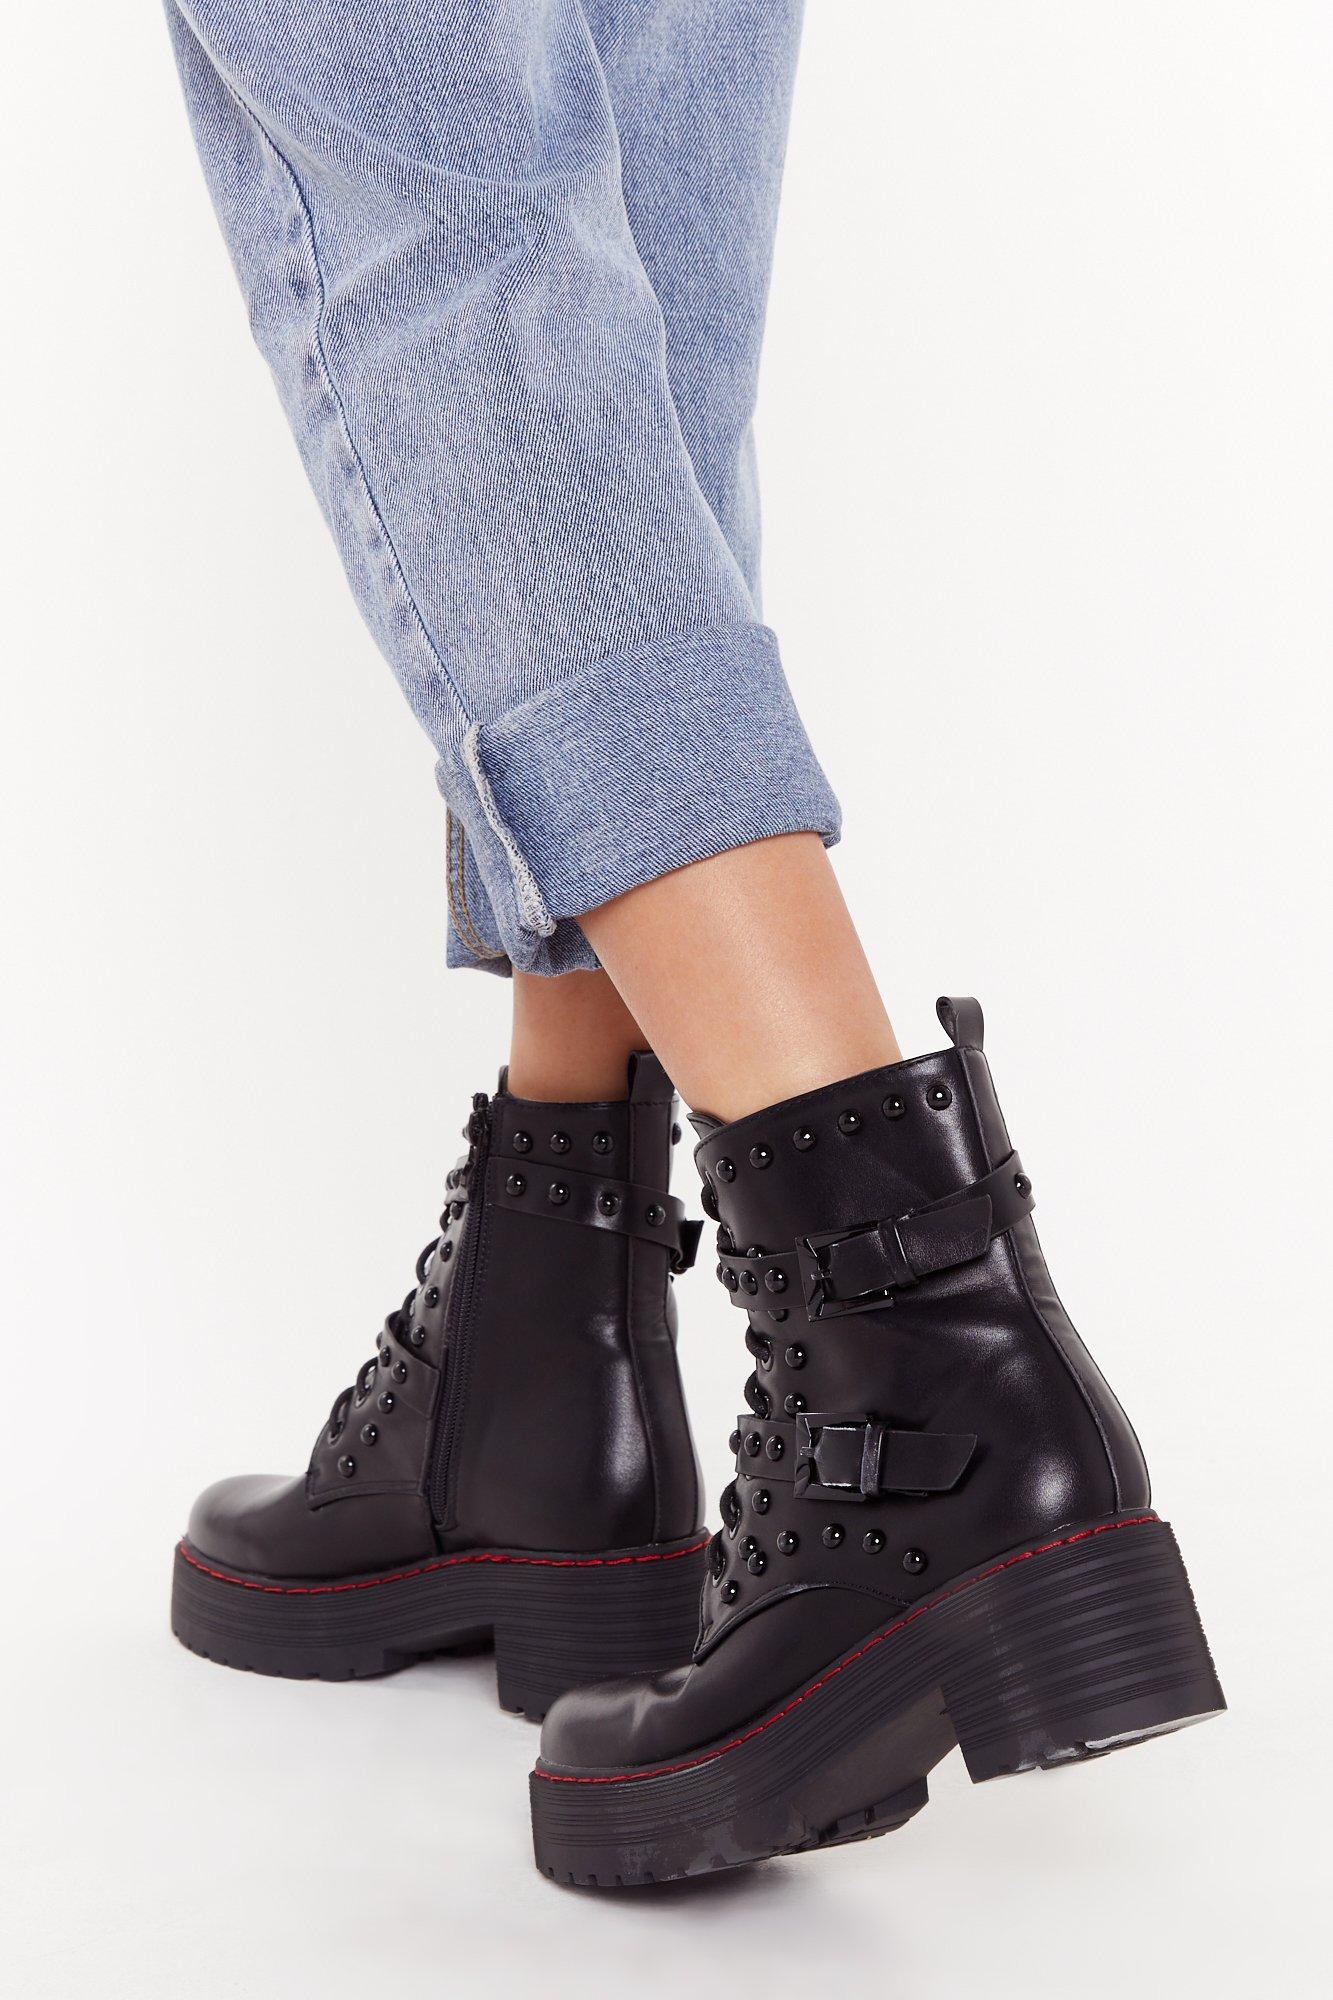 biker boots with studs